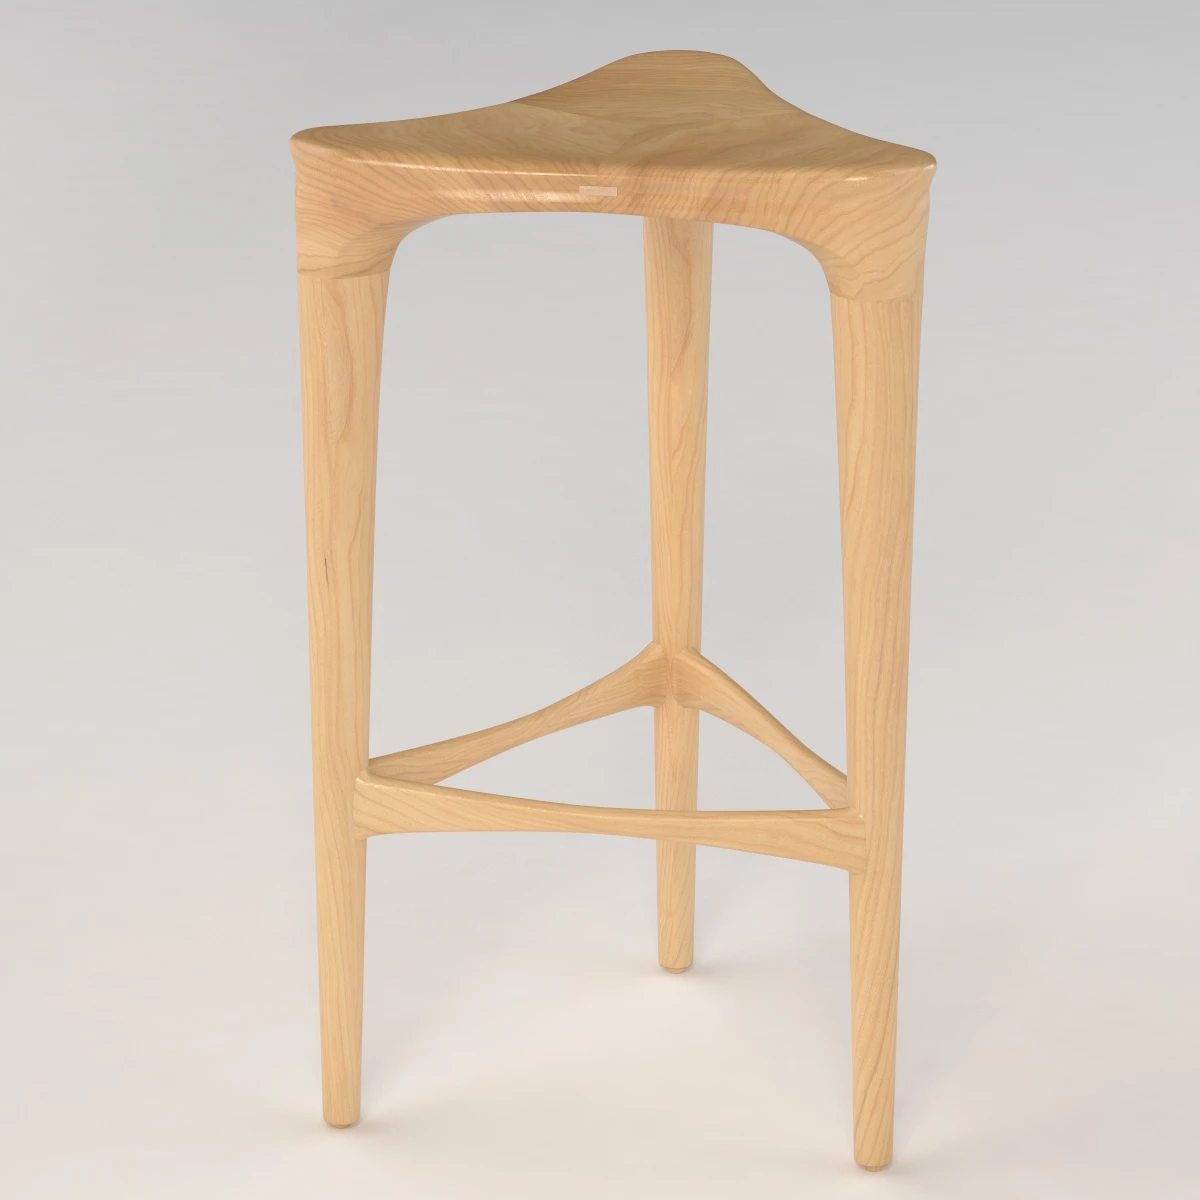 2 By 3 Wood Stools Geiger 3D Model_06